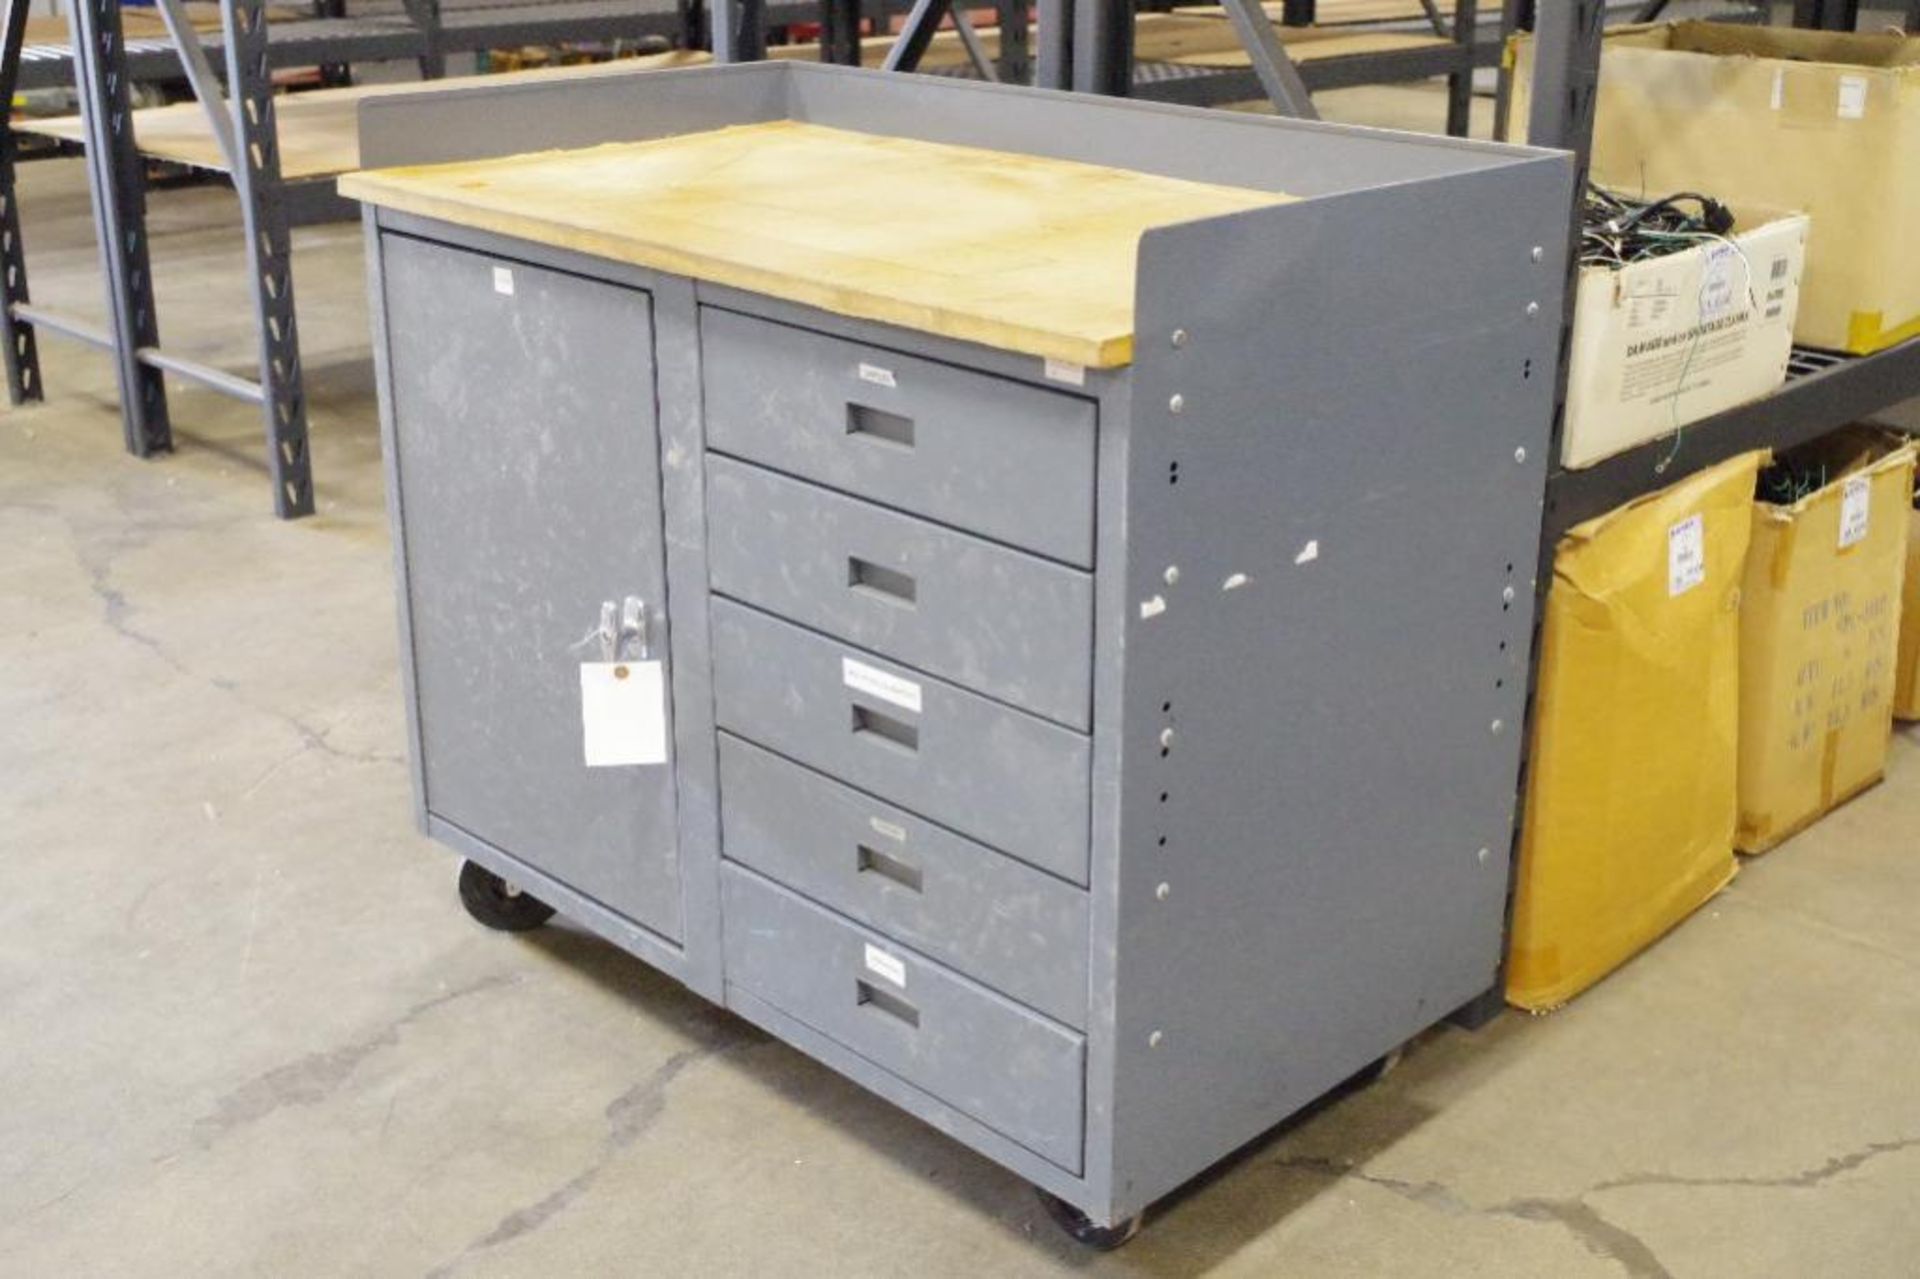 Rolling Metal Shop Desk w/ Cabinet, 5-Drawers (NO Key for Cabinet Handle) - Image 4 of 4